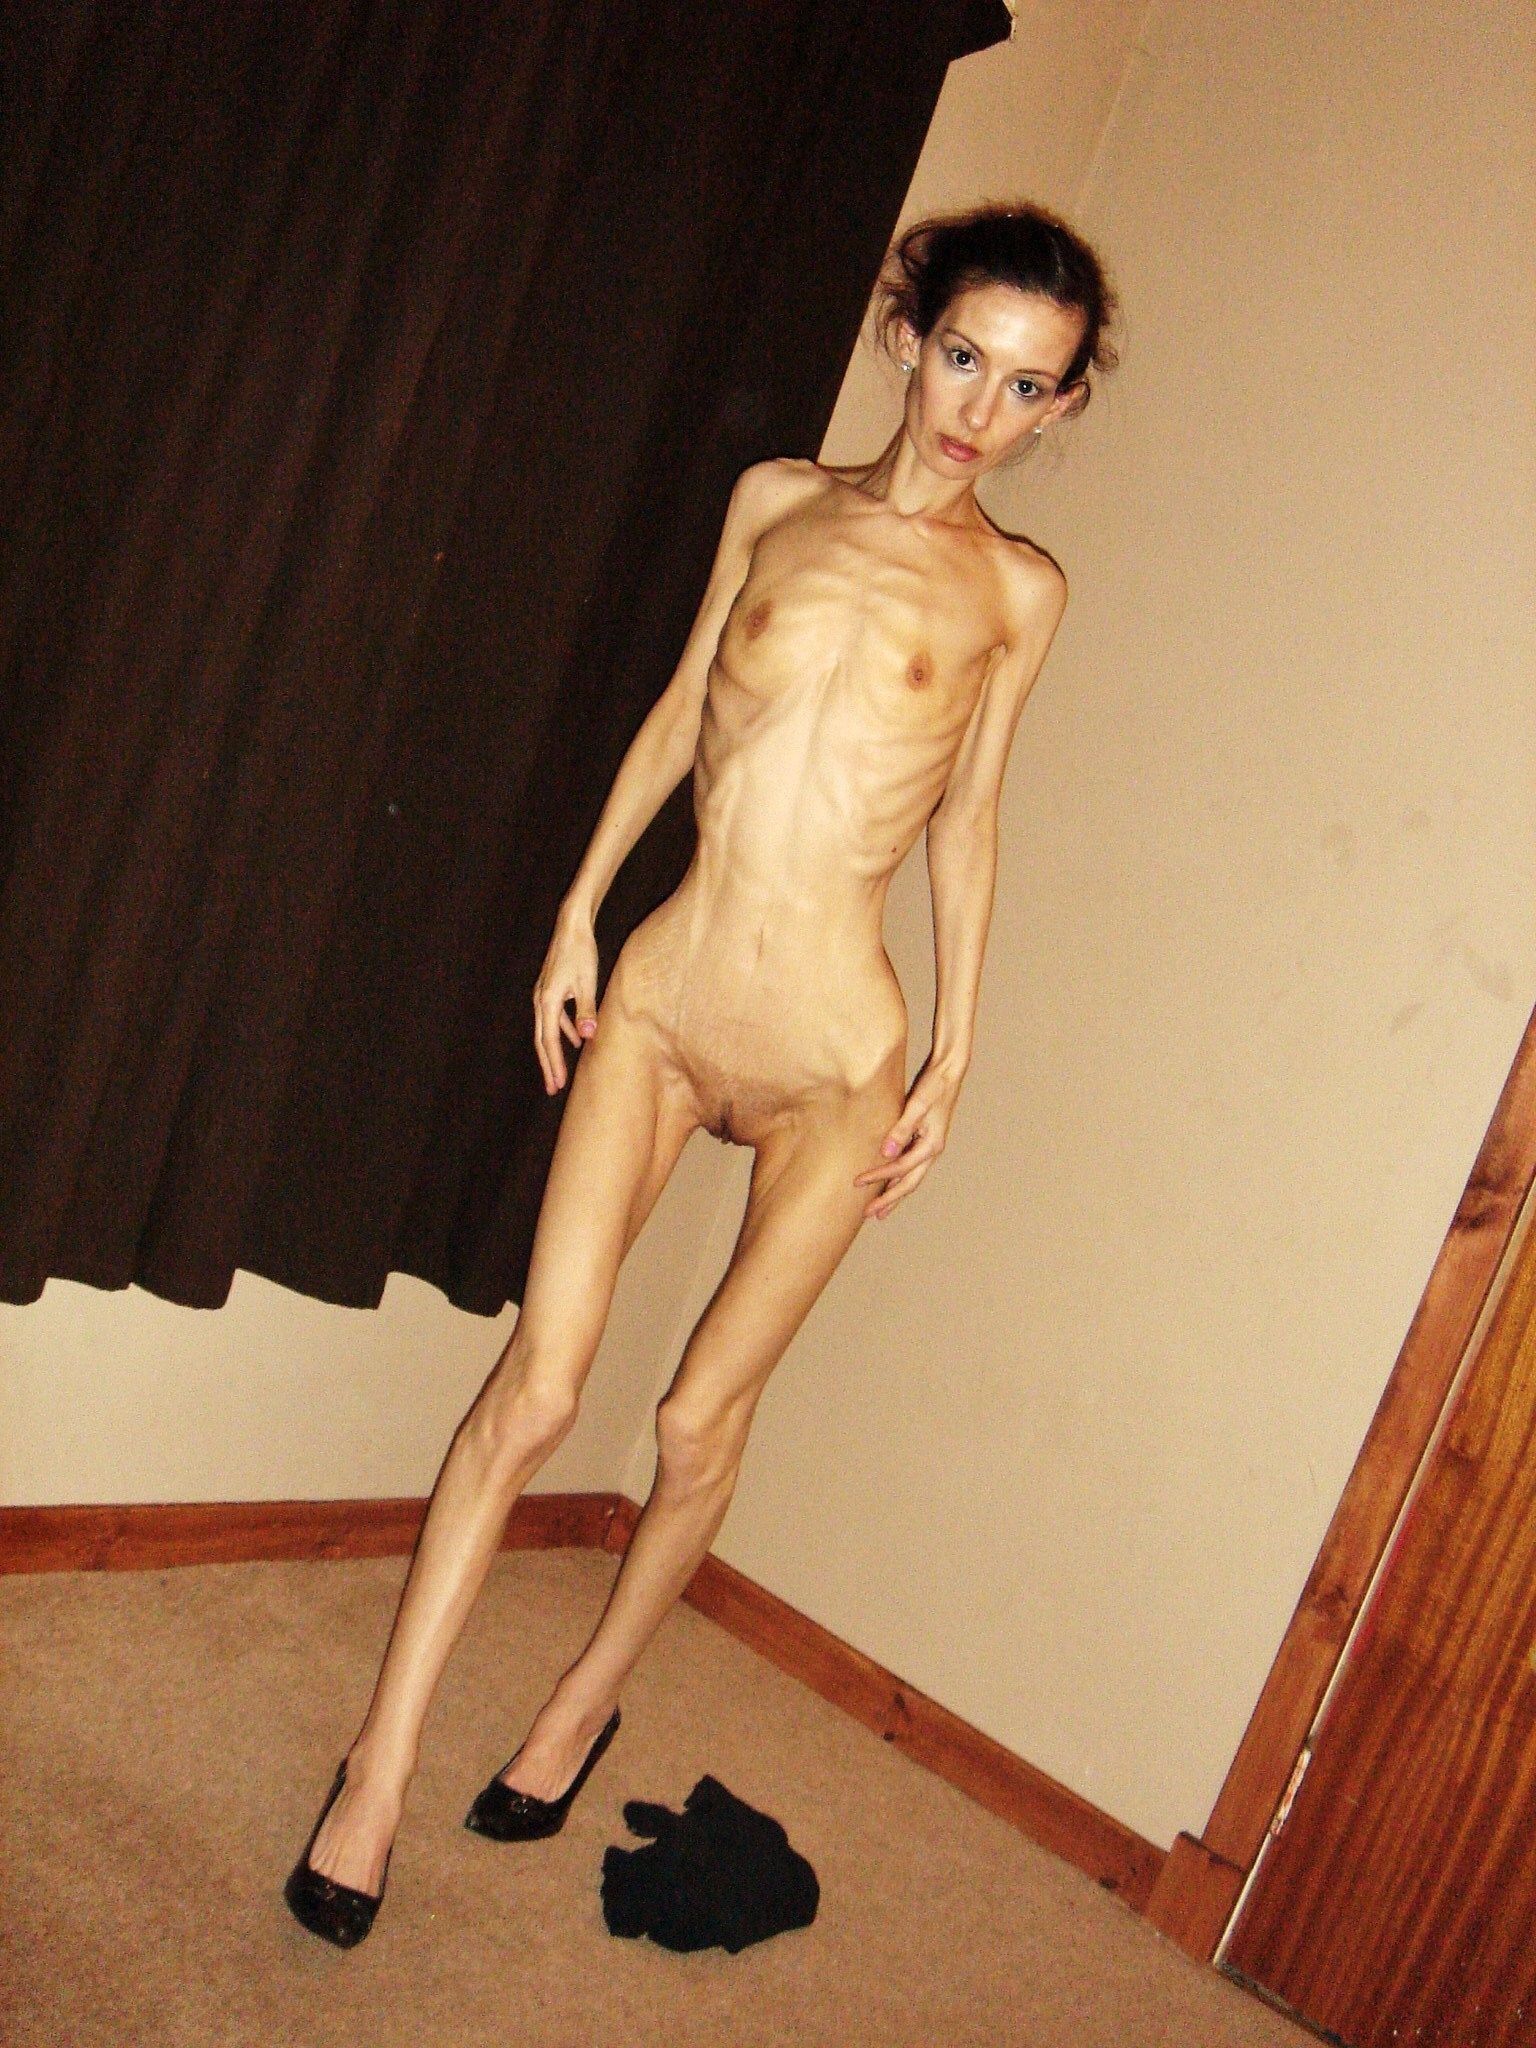 Anorexic Milf